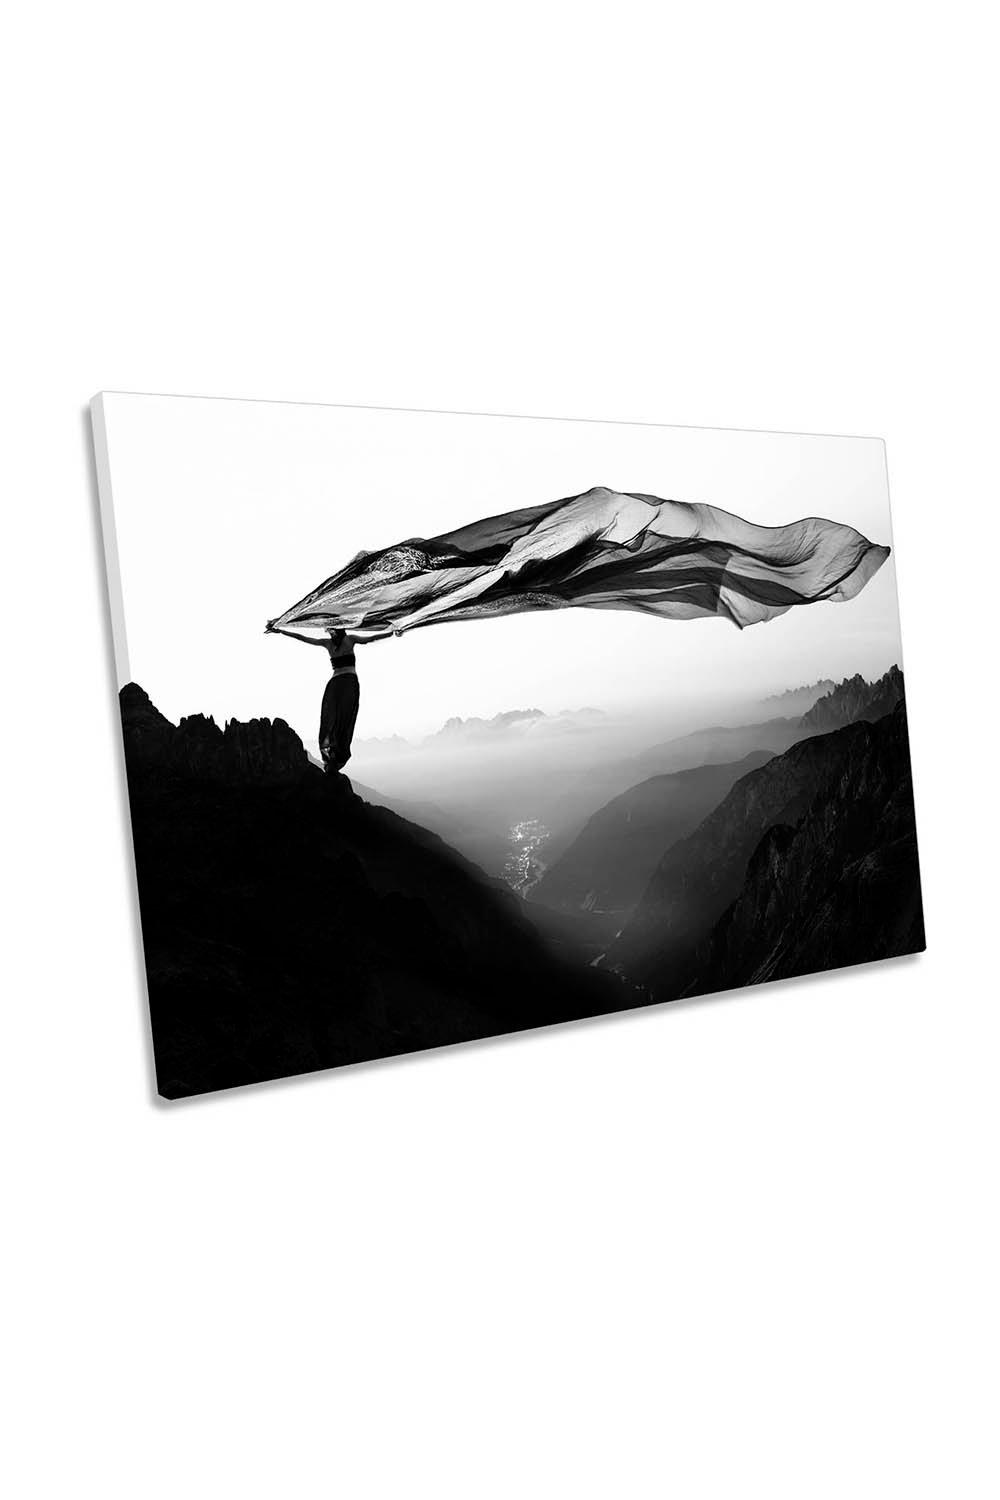 Free as the Wind Modern Canvas Wall Art Picture Print